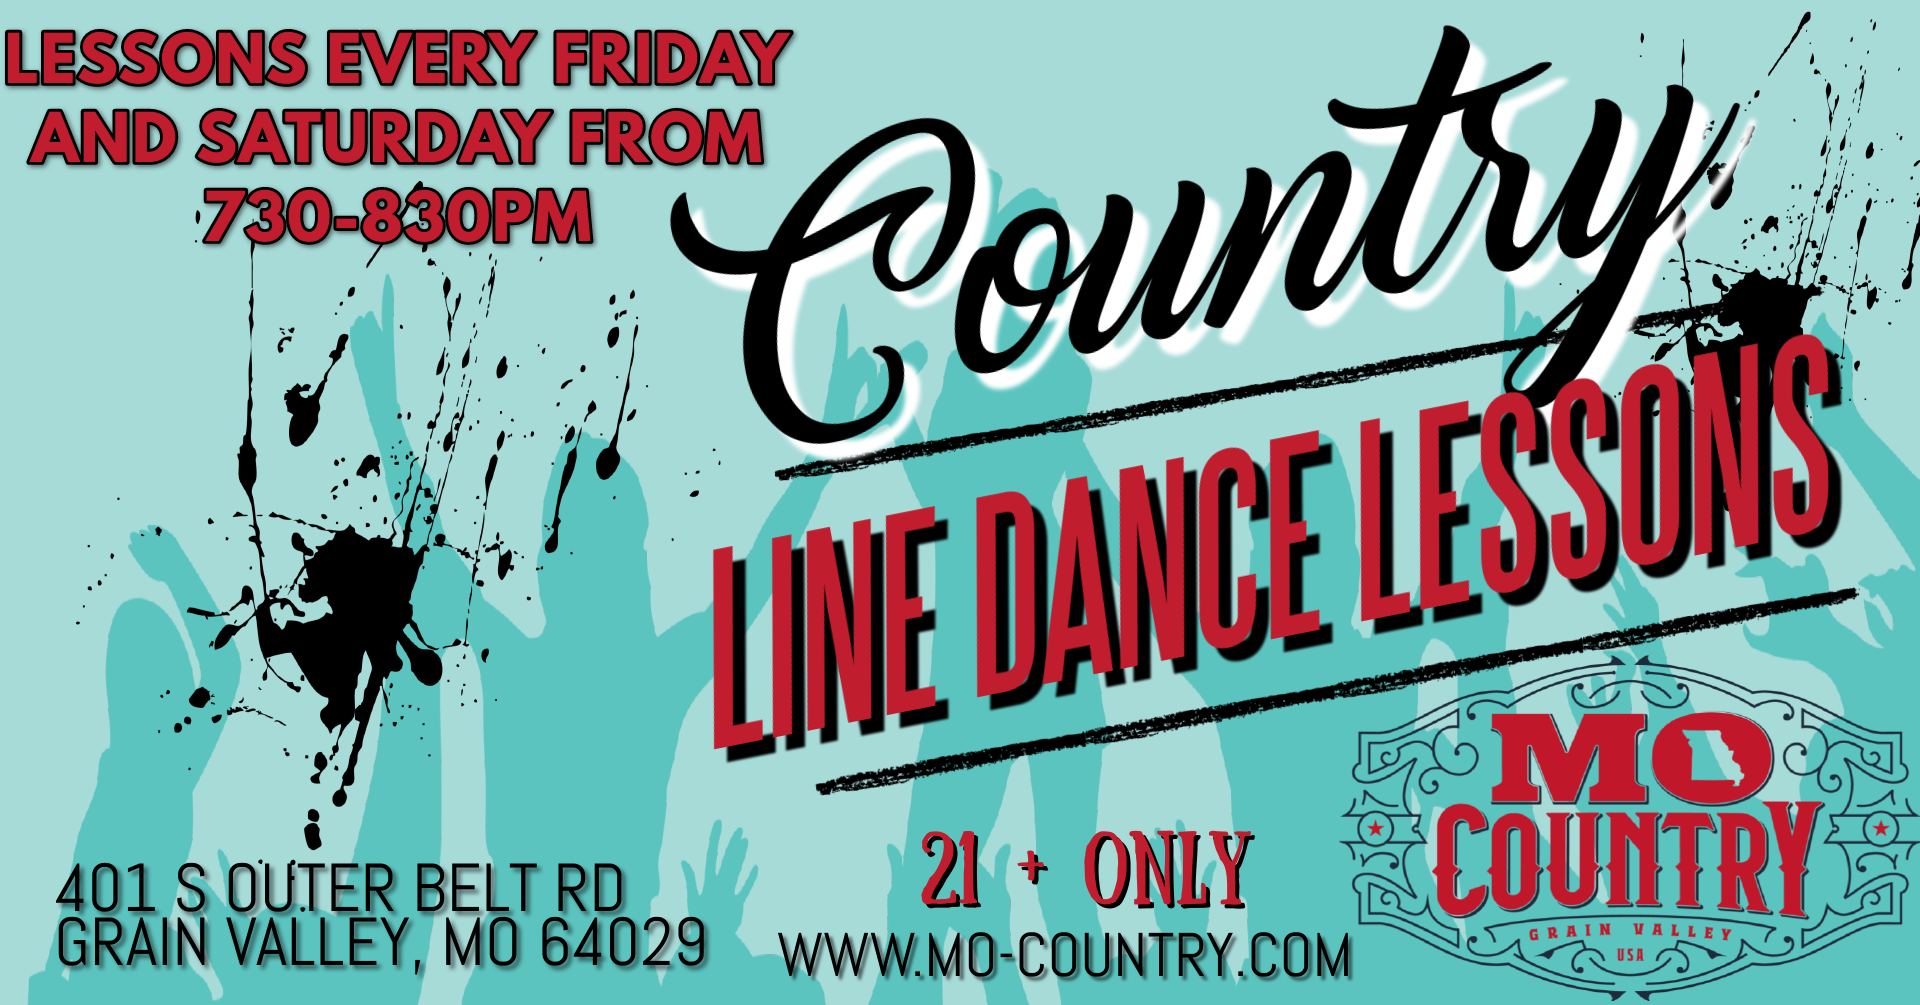 Line Dancing Lessons - MO Country 